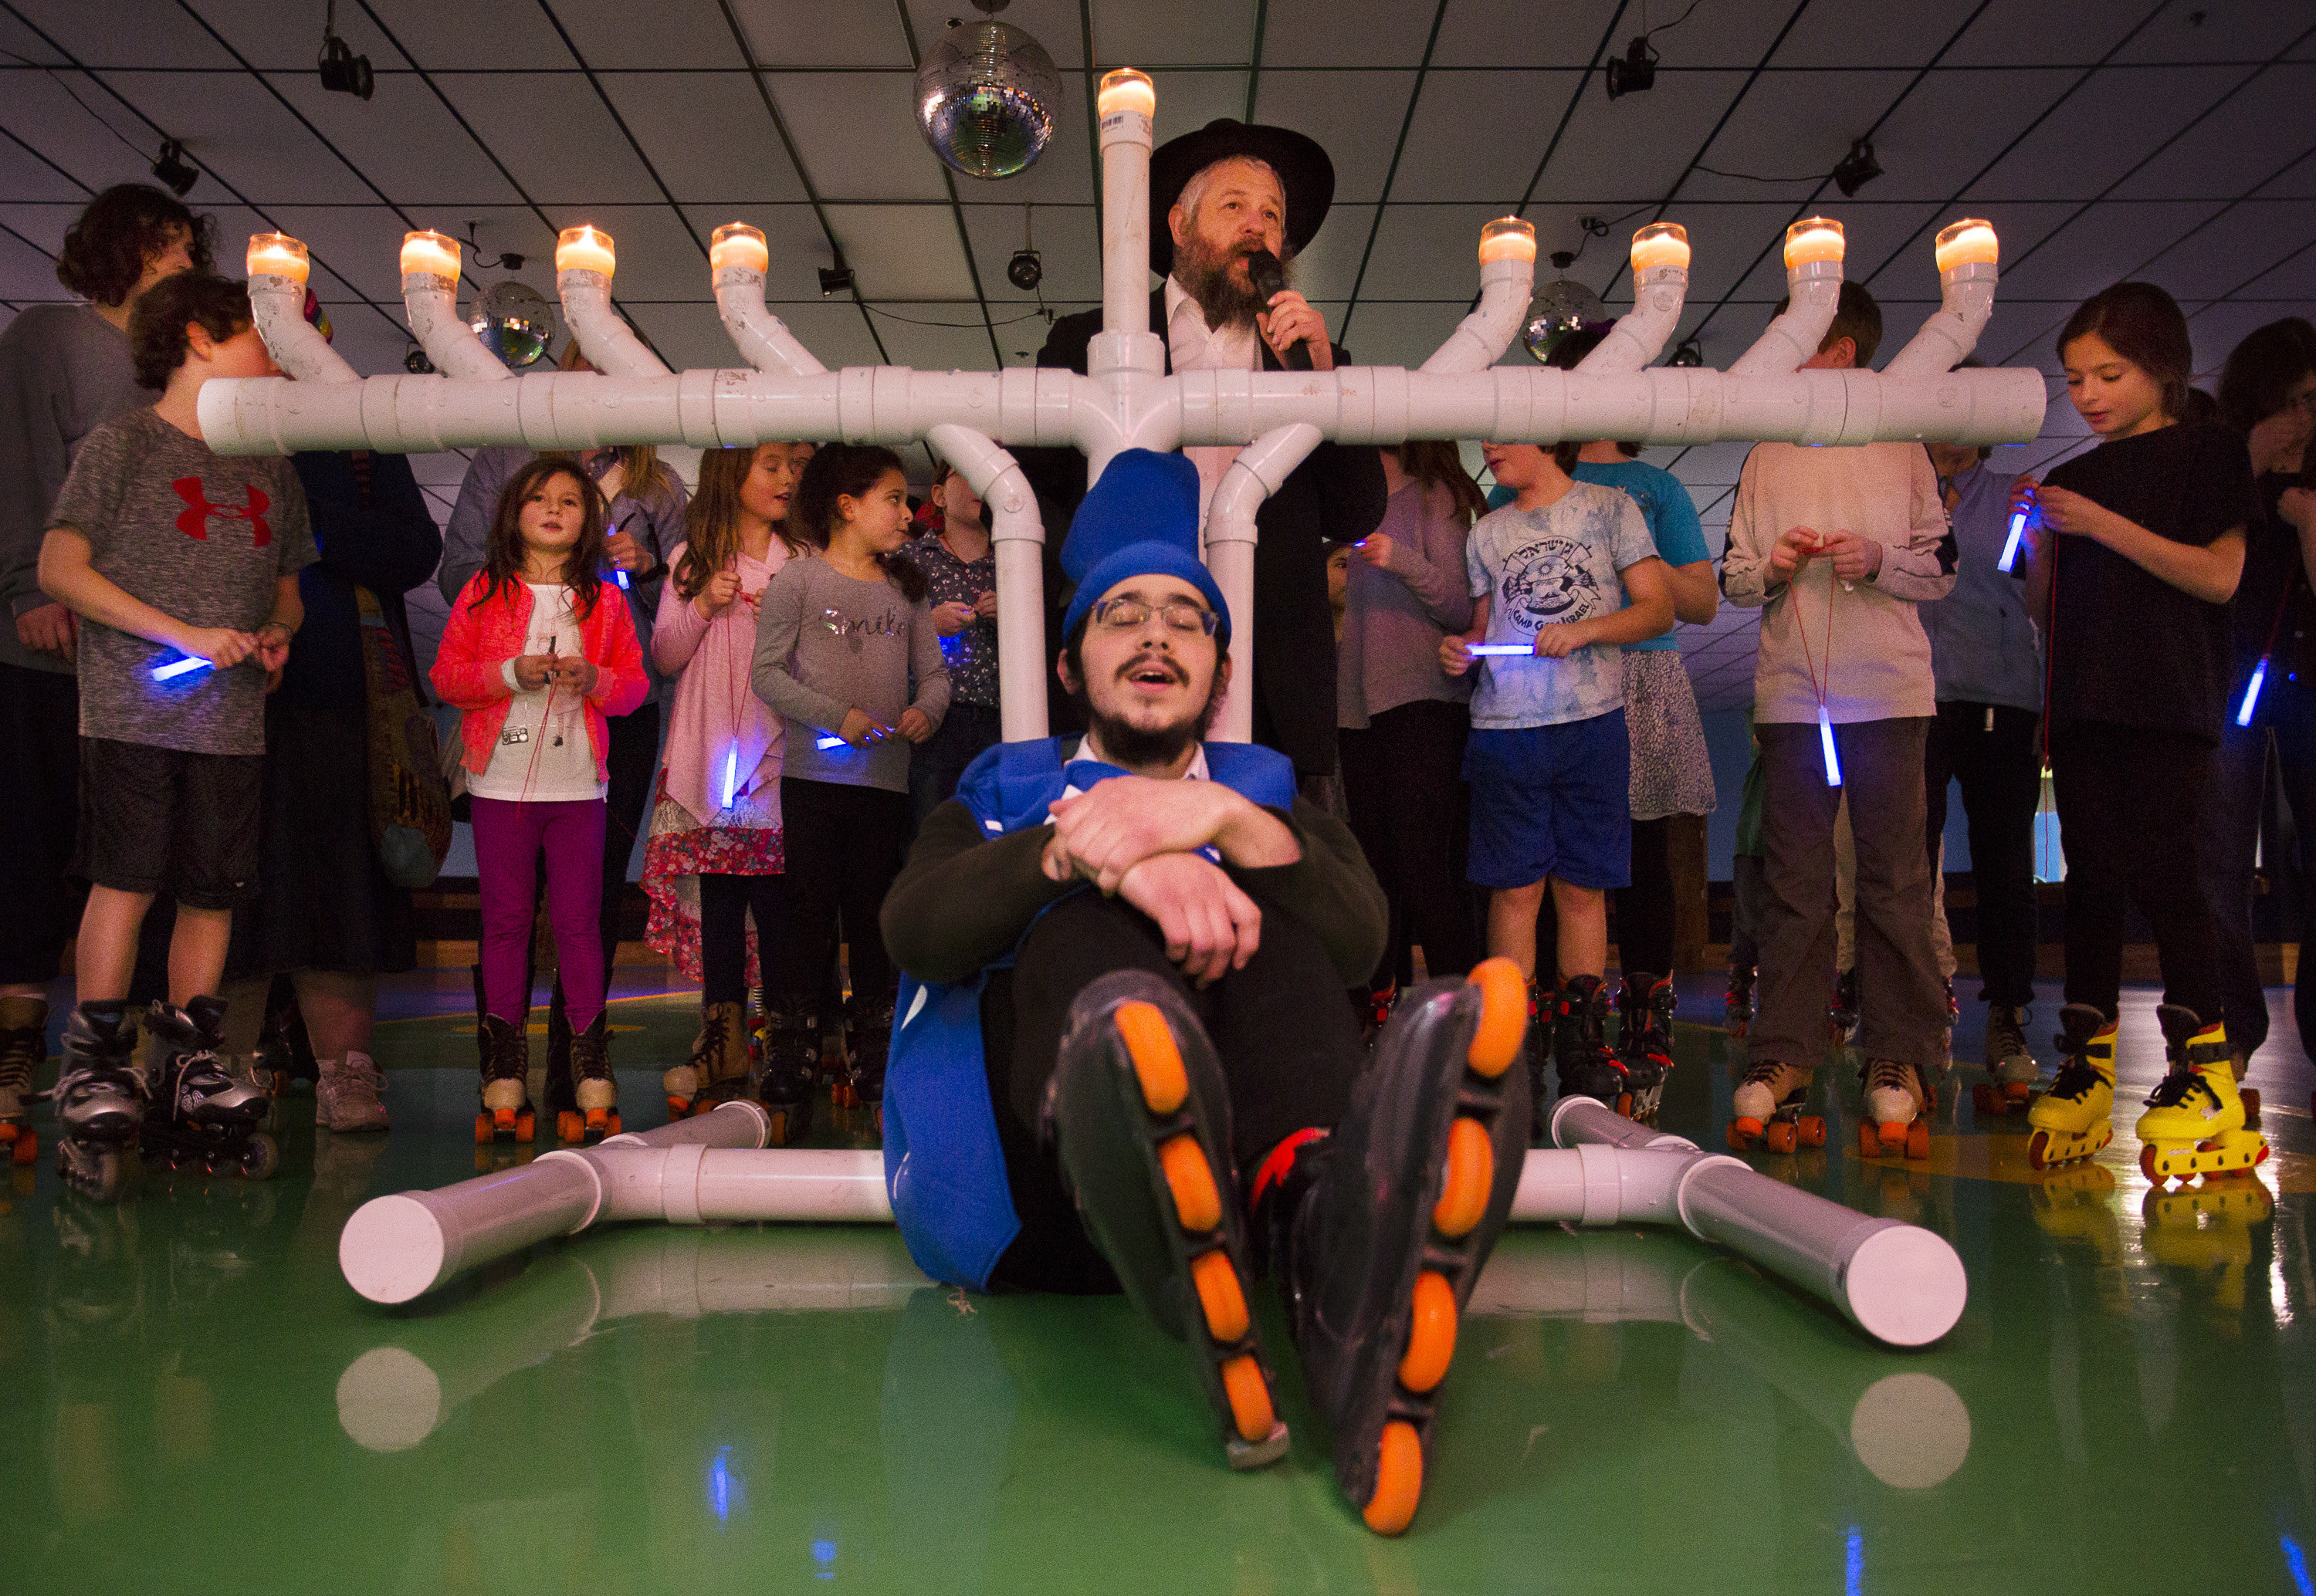 A man in roller skates site below a menorah made of PVC pipe, with a crowd behind him